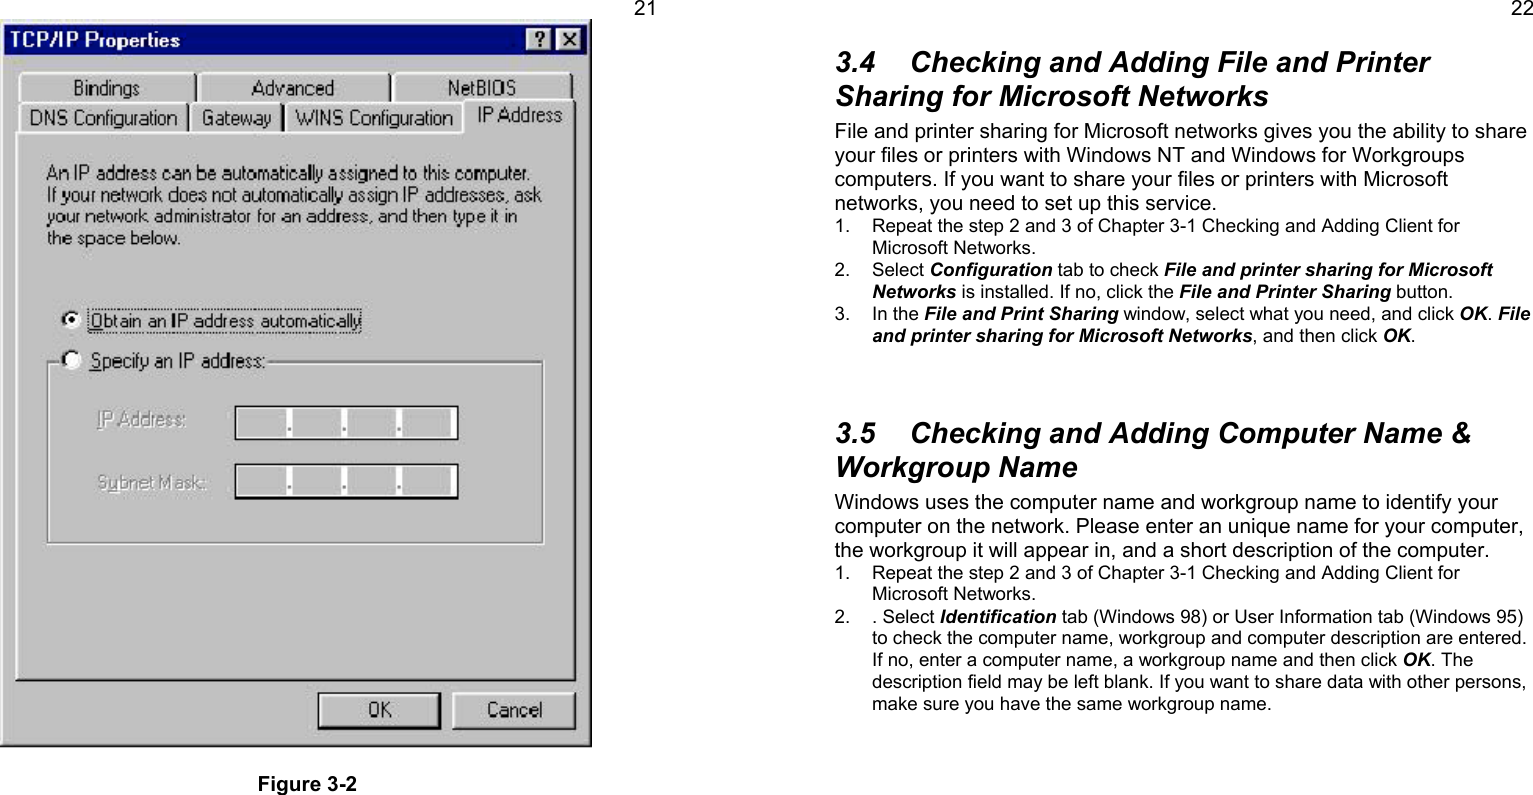 21Figure 3-2223.4  Checking and Adding File and PrinterSharing for Microsoft NetworksFile and printer sharing for Microsoft networks gives you the ability to shareyour files or printers with Windows NT and Windows for Workgroupscomputers. If you want to share your files or printers with Microsoftnetworks, you need to set up this service.1.  Repeat the step 2 and 3 of Chapter 3-1 Checking and Adding Client forMicrosoft Networks.2. Select Configuration tab to check File and printer sharing for MicrosoftNetworks is installed. If no, click the File and Printer Sharing button.3. In the File and Print Sharing window, select what you need, and click OK. Fileand printer sharing for Microsoft Networks, and then click OK.3.5  Checking and Adding Computer Name &amp;Workgroup NameWindows uses the computer name and workgroup name to identify yourcomputer on the network. Please enter an unique name for your computer,the workgroup it will appear in, and a short description of the computer.1.  Repeat the step 2 and 3 of Chapter 3-1 Checking and Adding Client forMicrosoft Networks.2. . Select Identification tab (Windows 98) or User Information tab (Windows 95)to check the computer name, workgroup and computer description are entered.If no, enter a computer name, a workgroup name and then click OK. Thedescription field may be left blank. If you want to share data with other persons,make sure you have the same workgroup name.